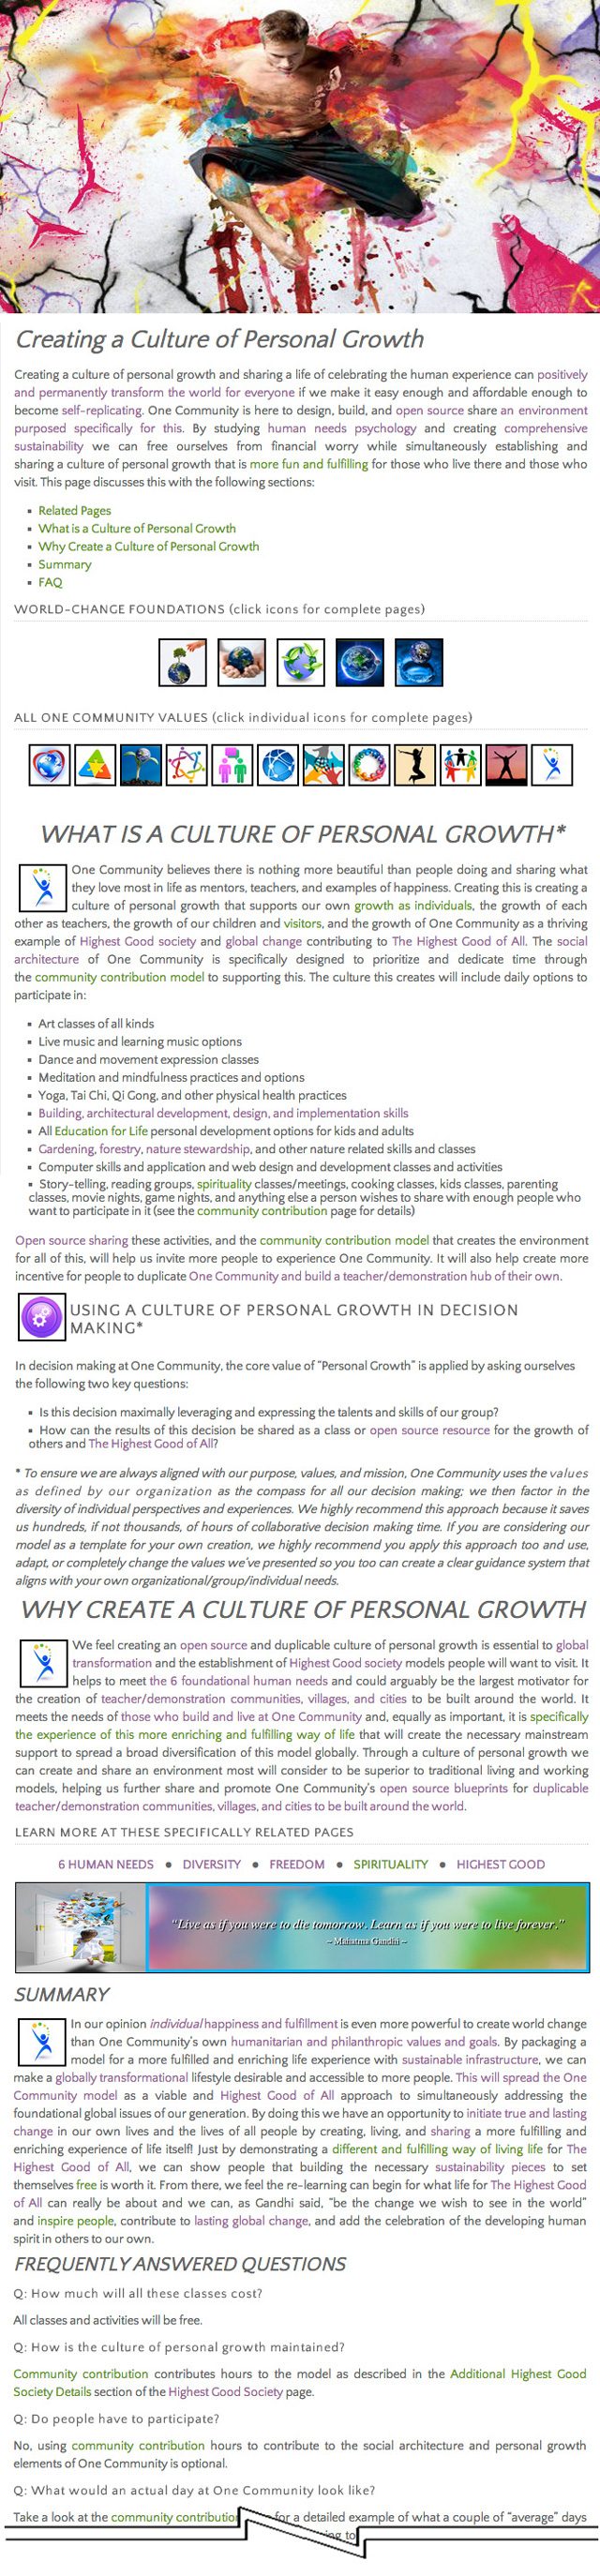 Personal Growth page, One Community